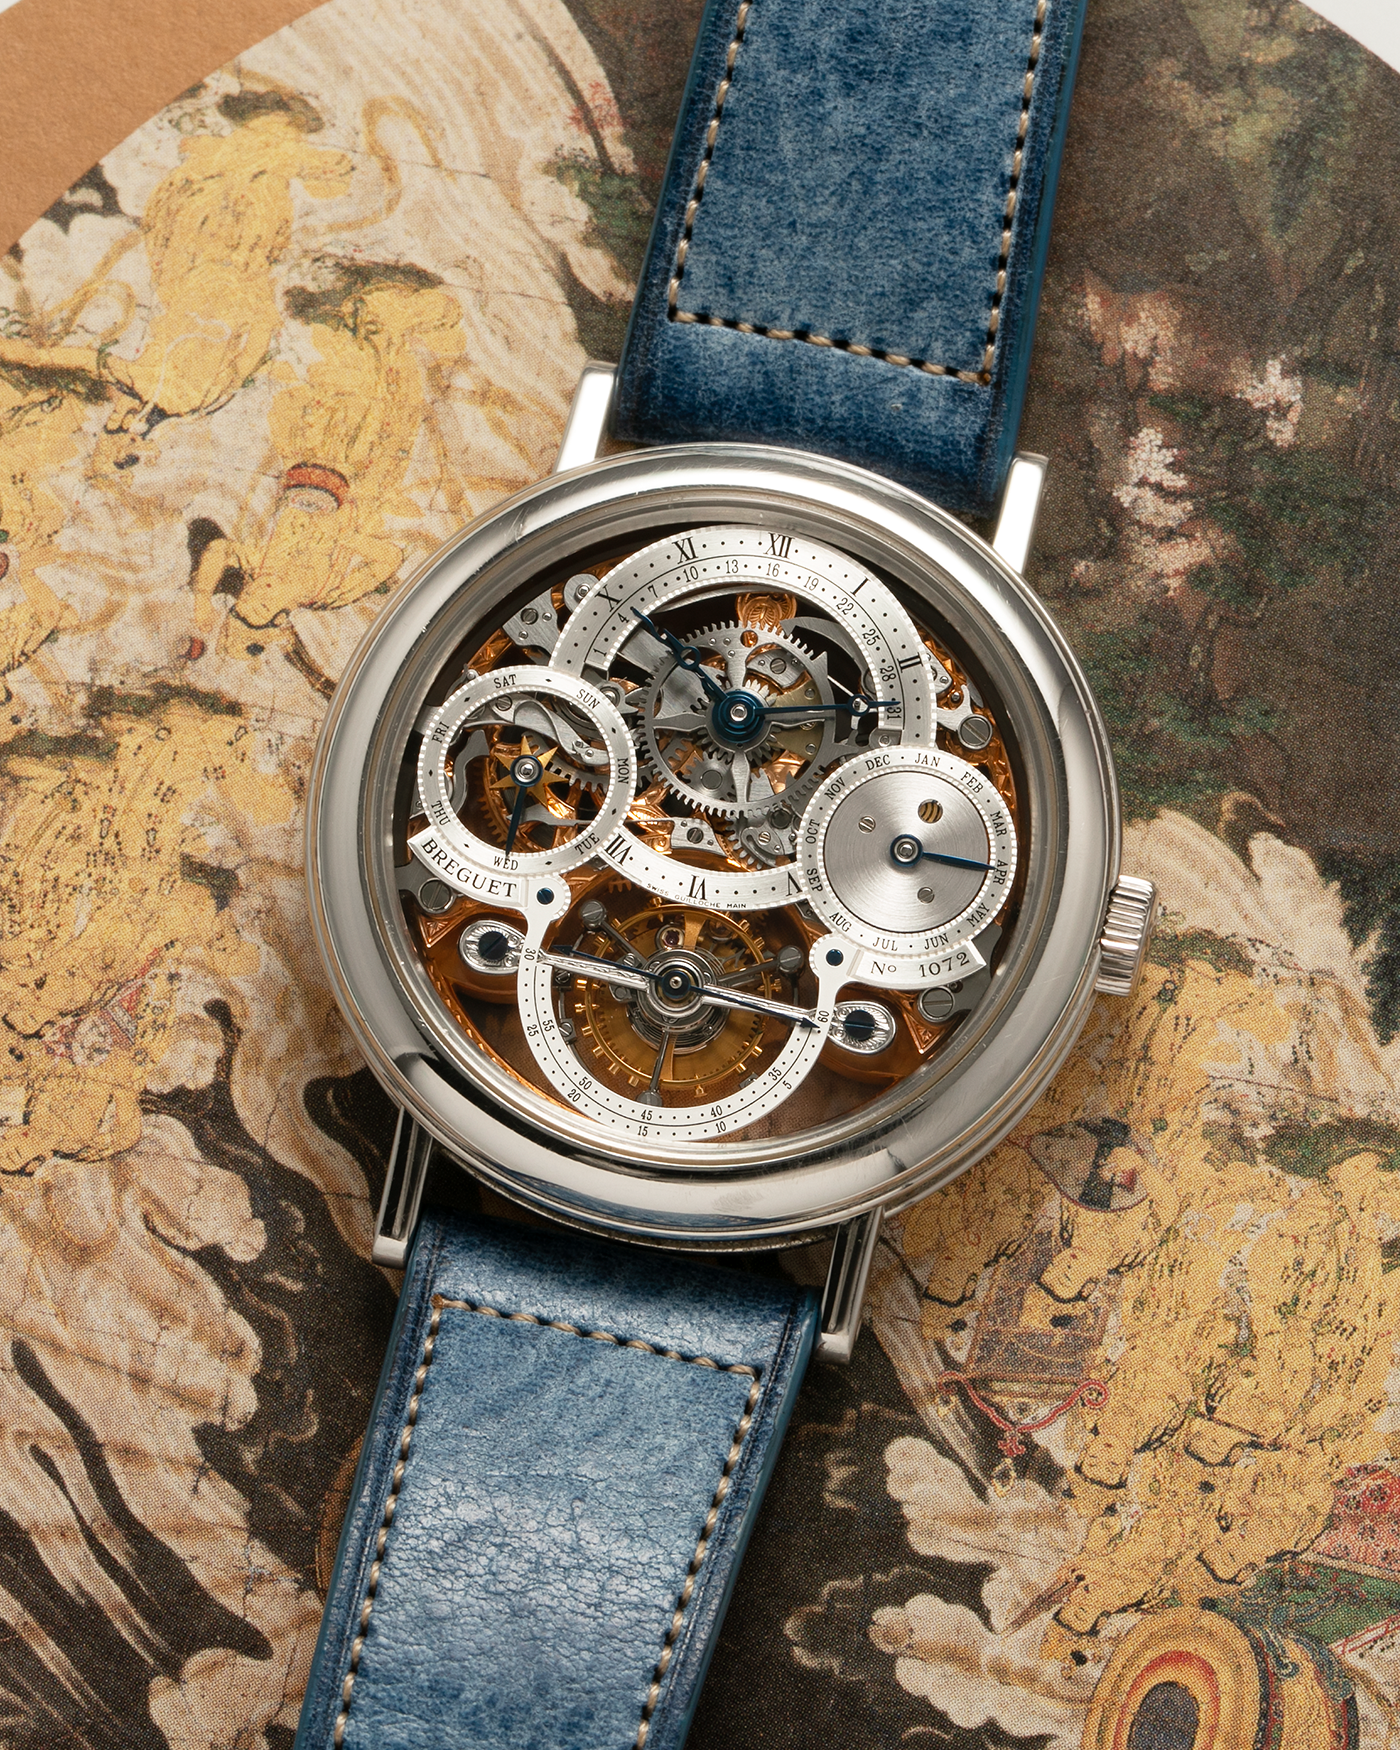 Brand: Breguet Year: 2000s Model: Classique Perpetual Calendar Tourbillon Reference Number: 3755 Material: Platinum 950 Movement: Breguet Cal. 558QPSQ, Manual-Winding Case Diameter: 40mm Lug Width: 20mm Strap: Strapology Denim Blue Calf Leather Strap with Signed Platinum 950 Deployant Buckle